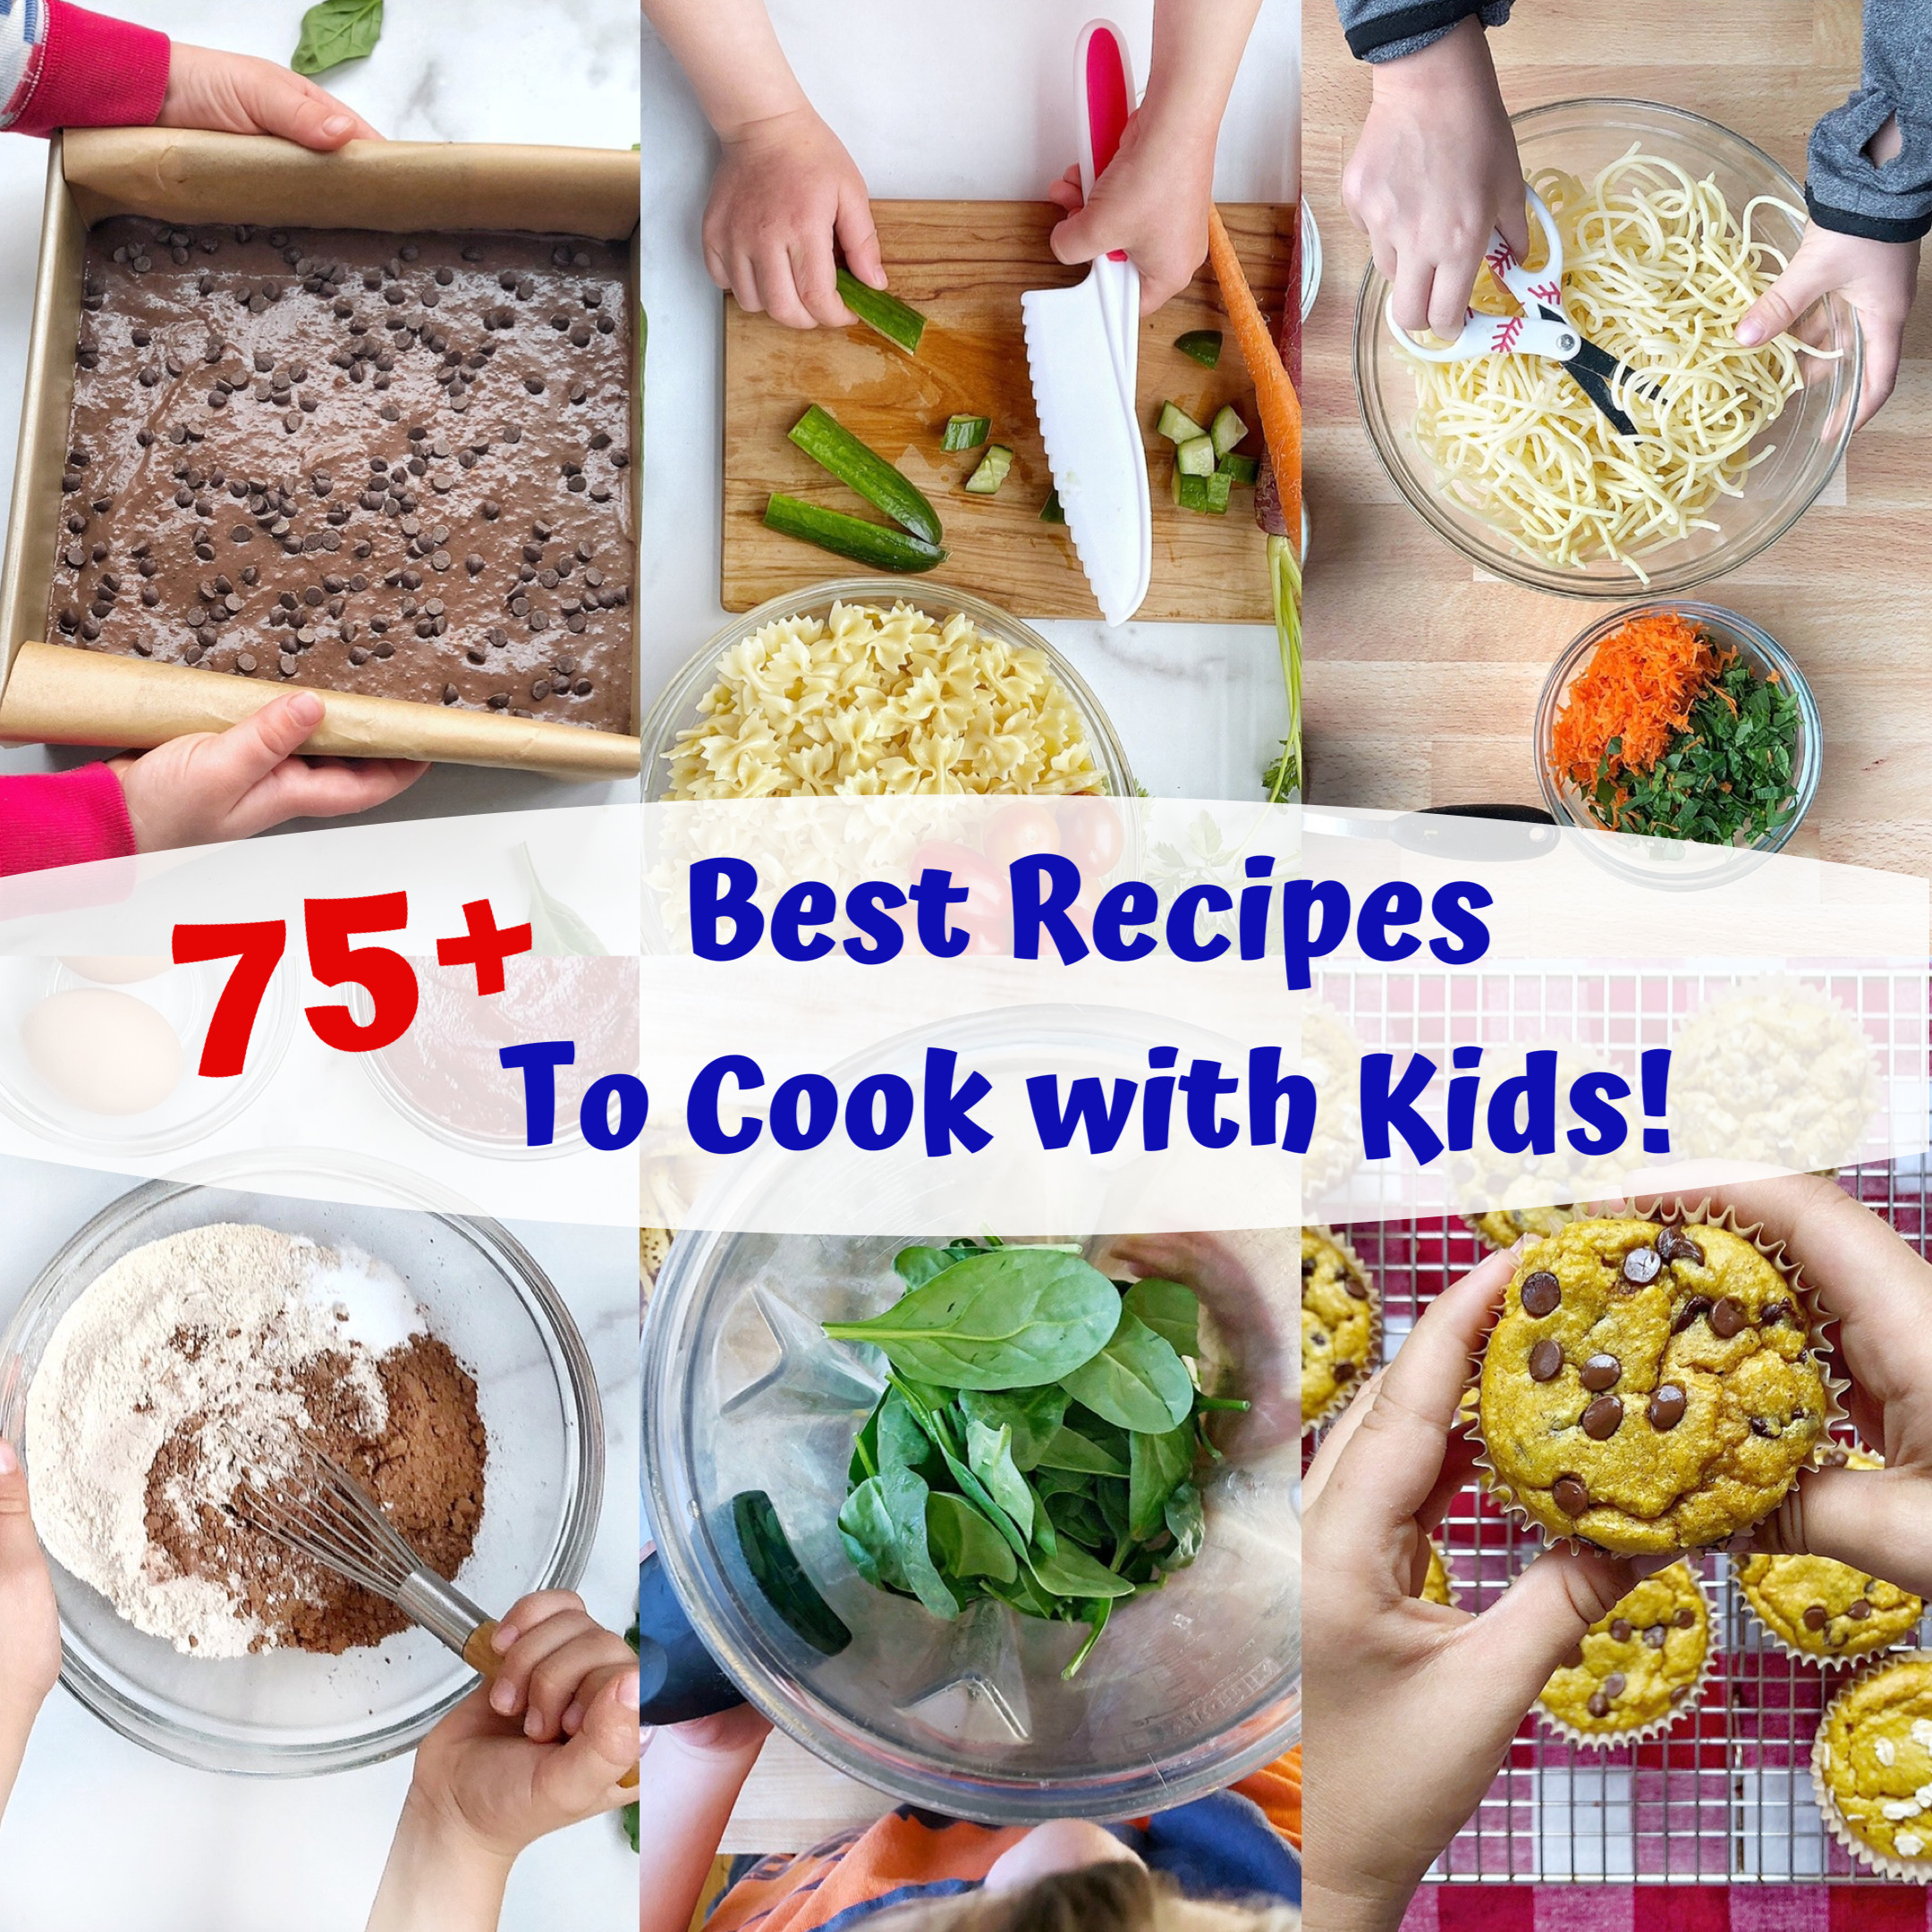 The Best Cooking Tools for Kids - Happy Kids Kitchen by Heather